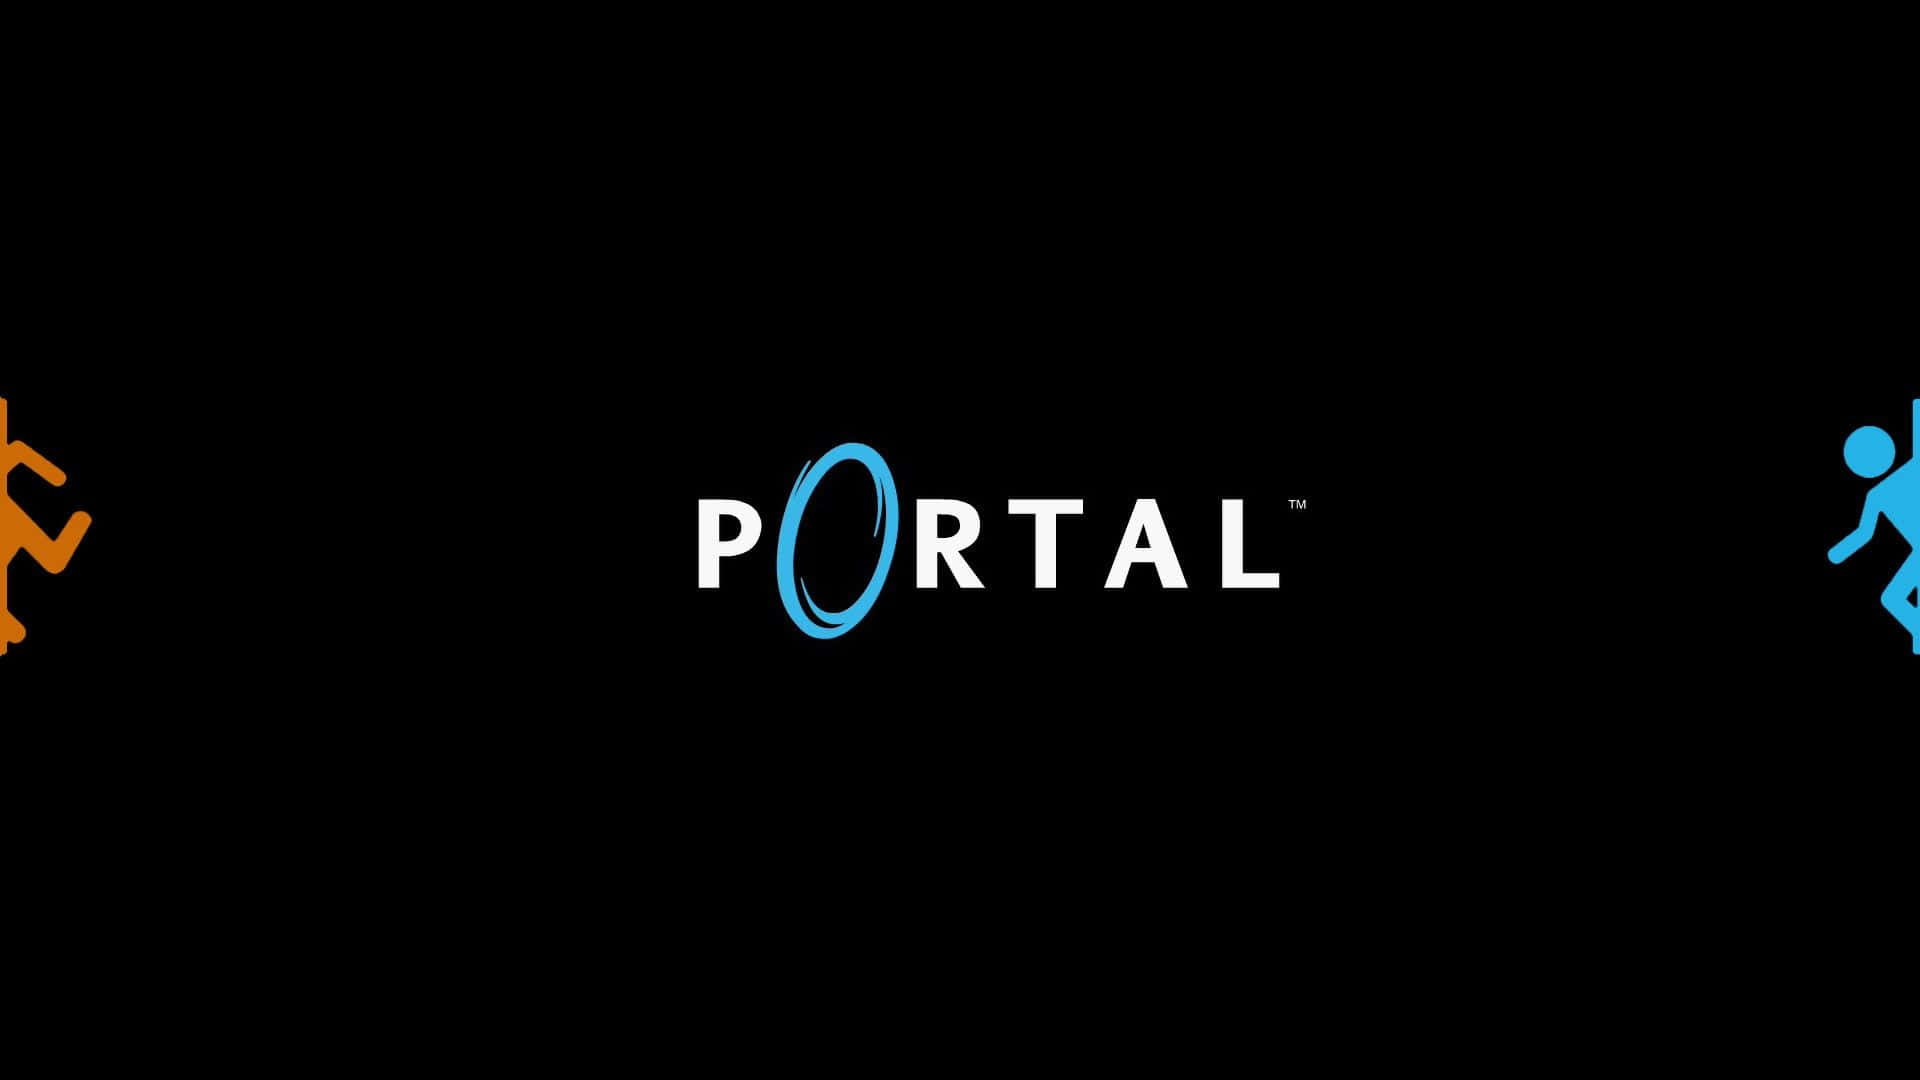 Aperture Science in the labyrinth of Portals